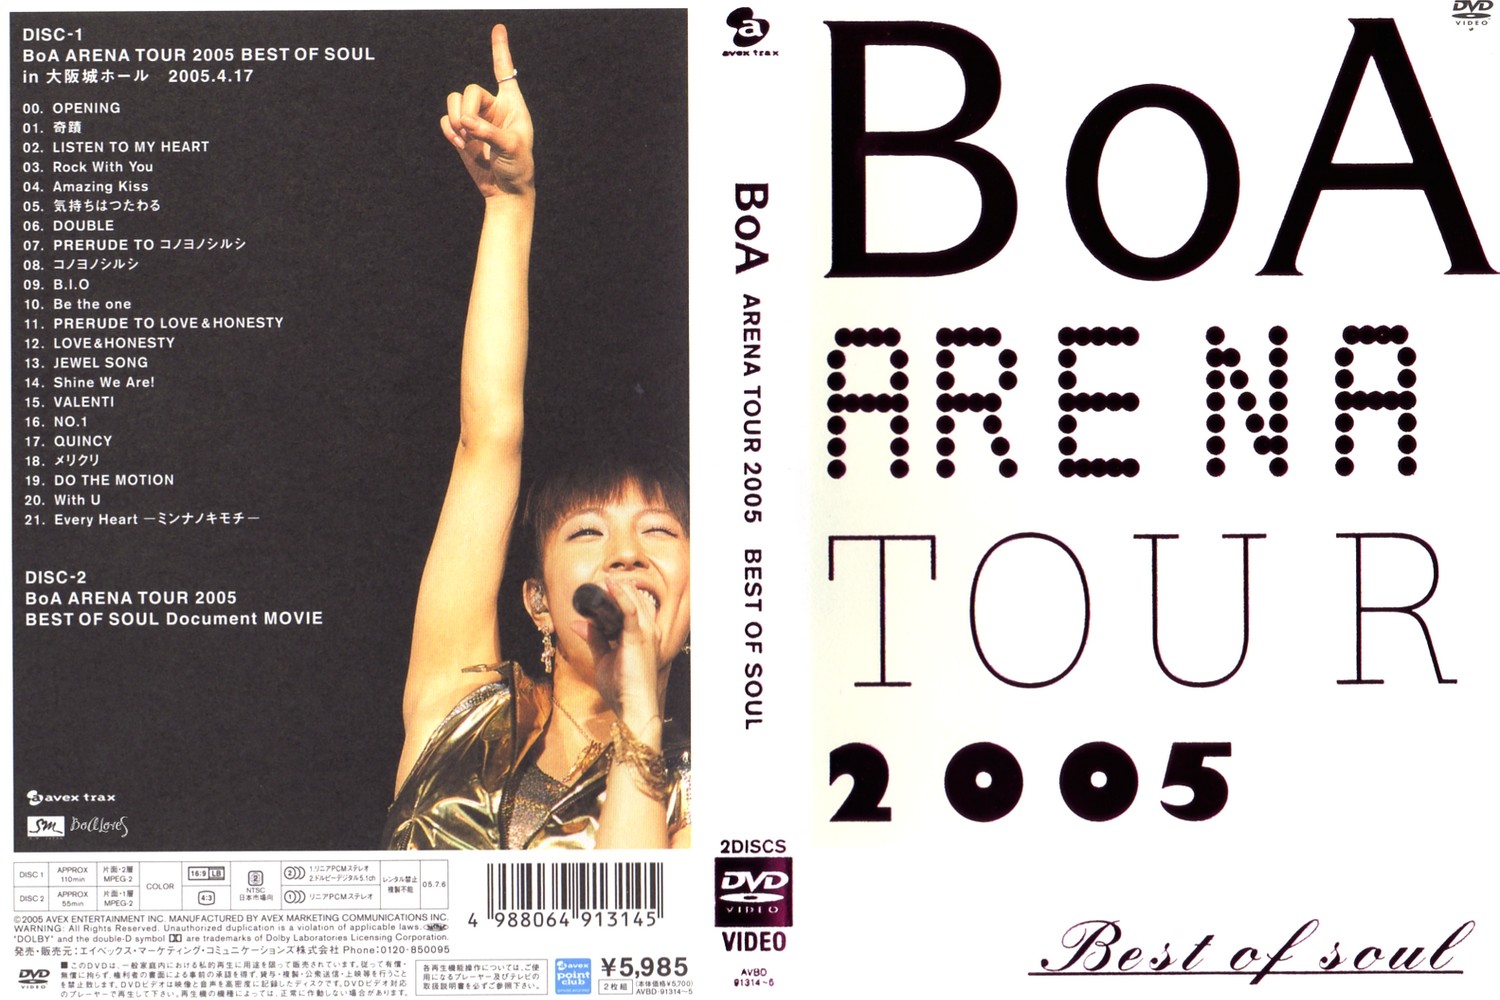 BoA - Arena Tour 2005 DVD Packaging